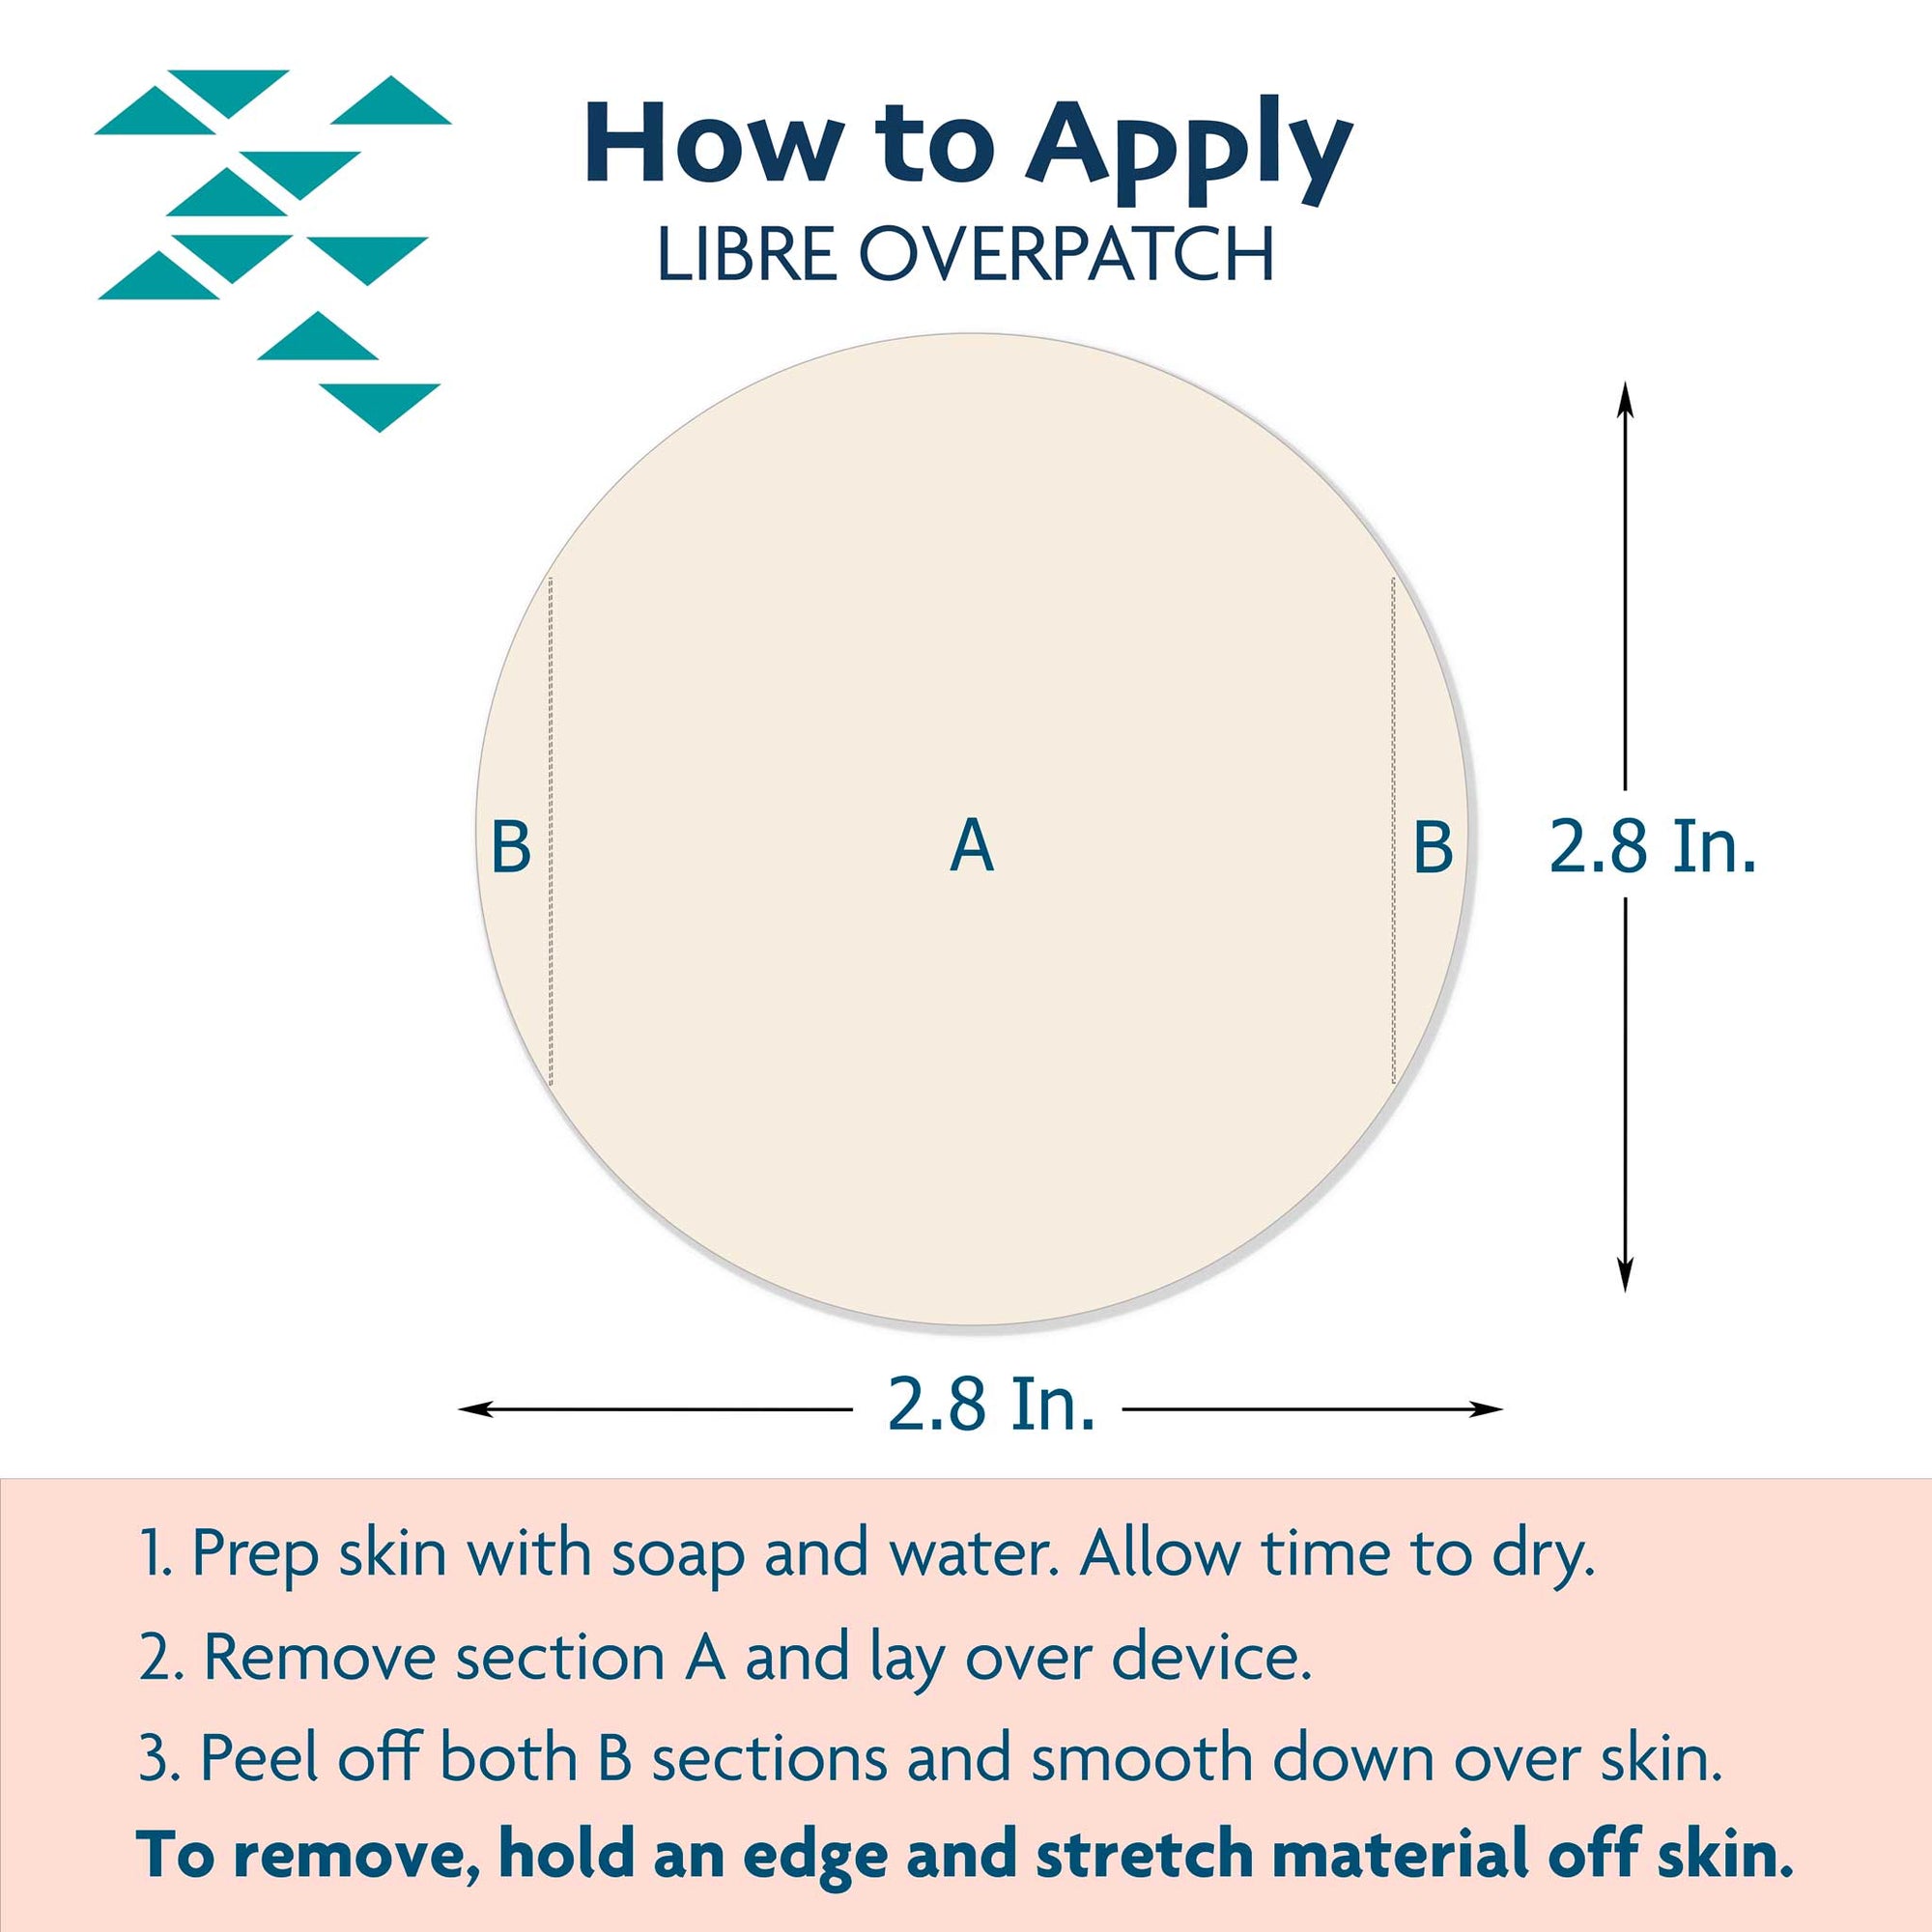 ExpressionMed Freestyle Libre Overpatch application instructions, Abbott Lingo